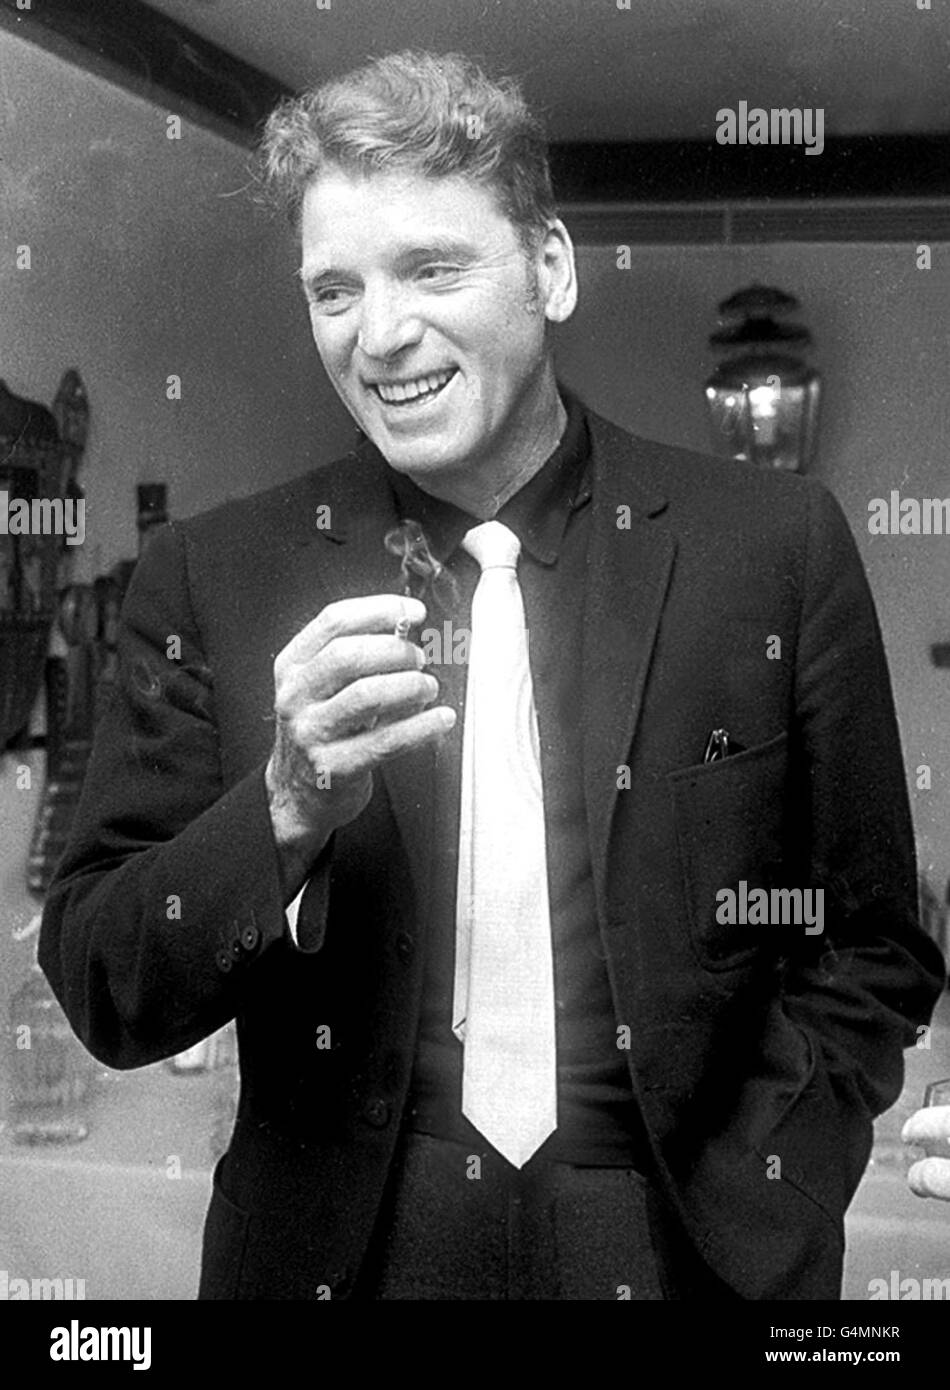 Burt Lancaster in London on a one-day visit to meet Sir Laurence Olivier to discuss their forthcoming film together, 'Khartoum'. Stock Photo